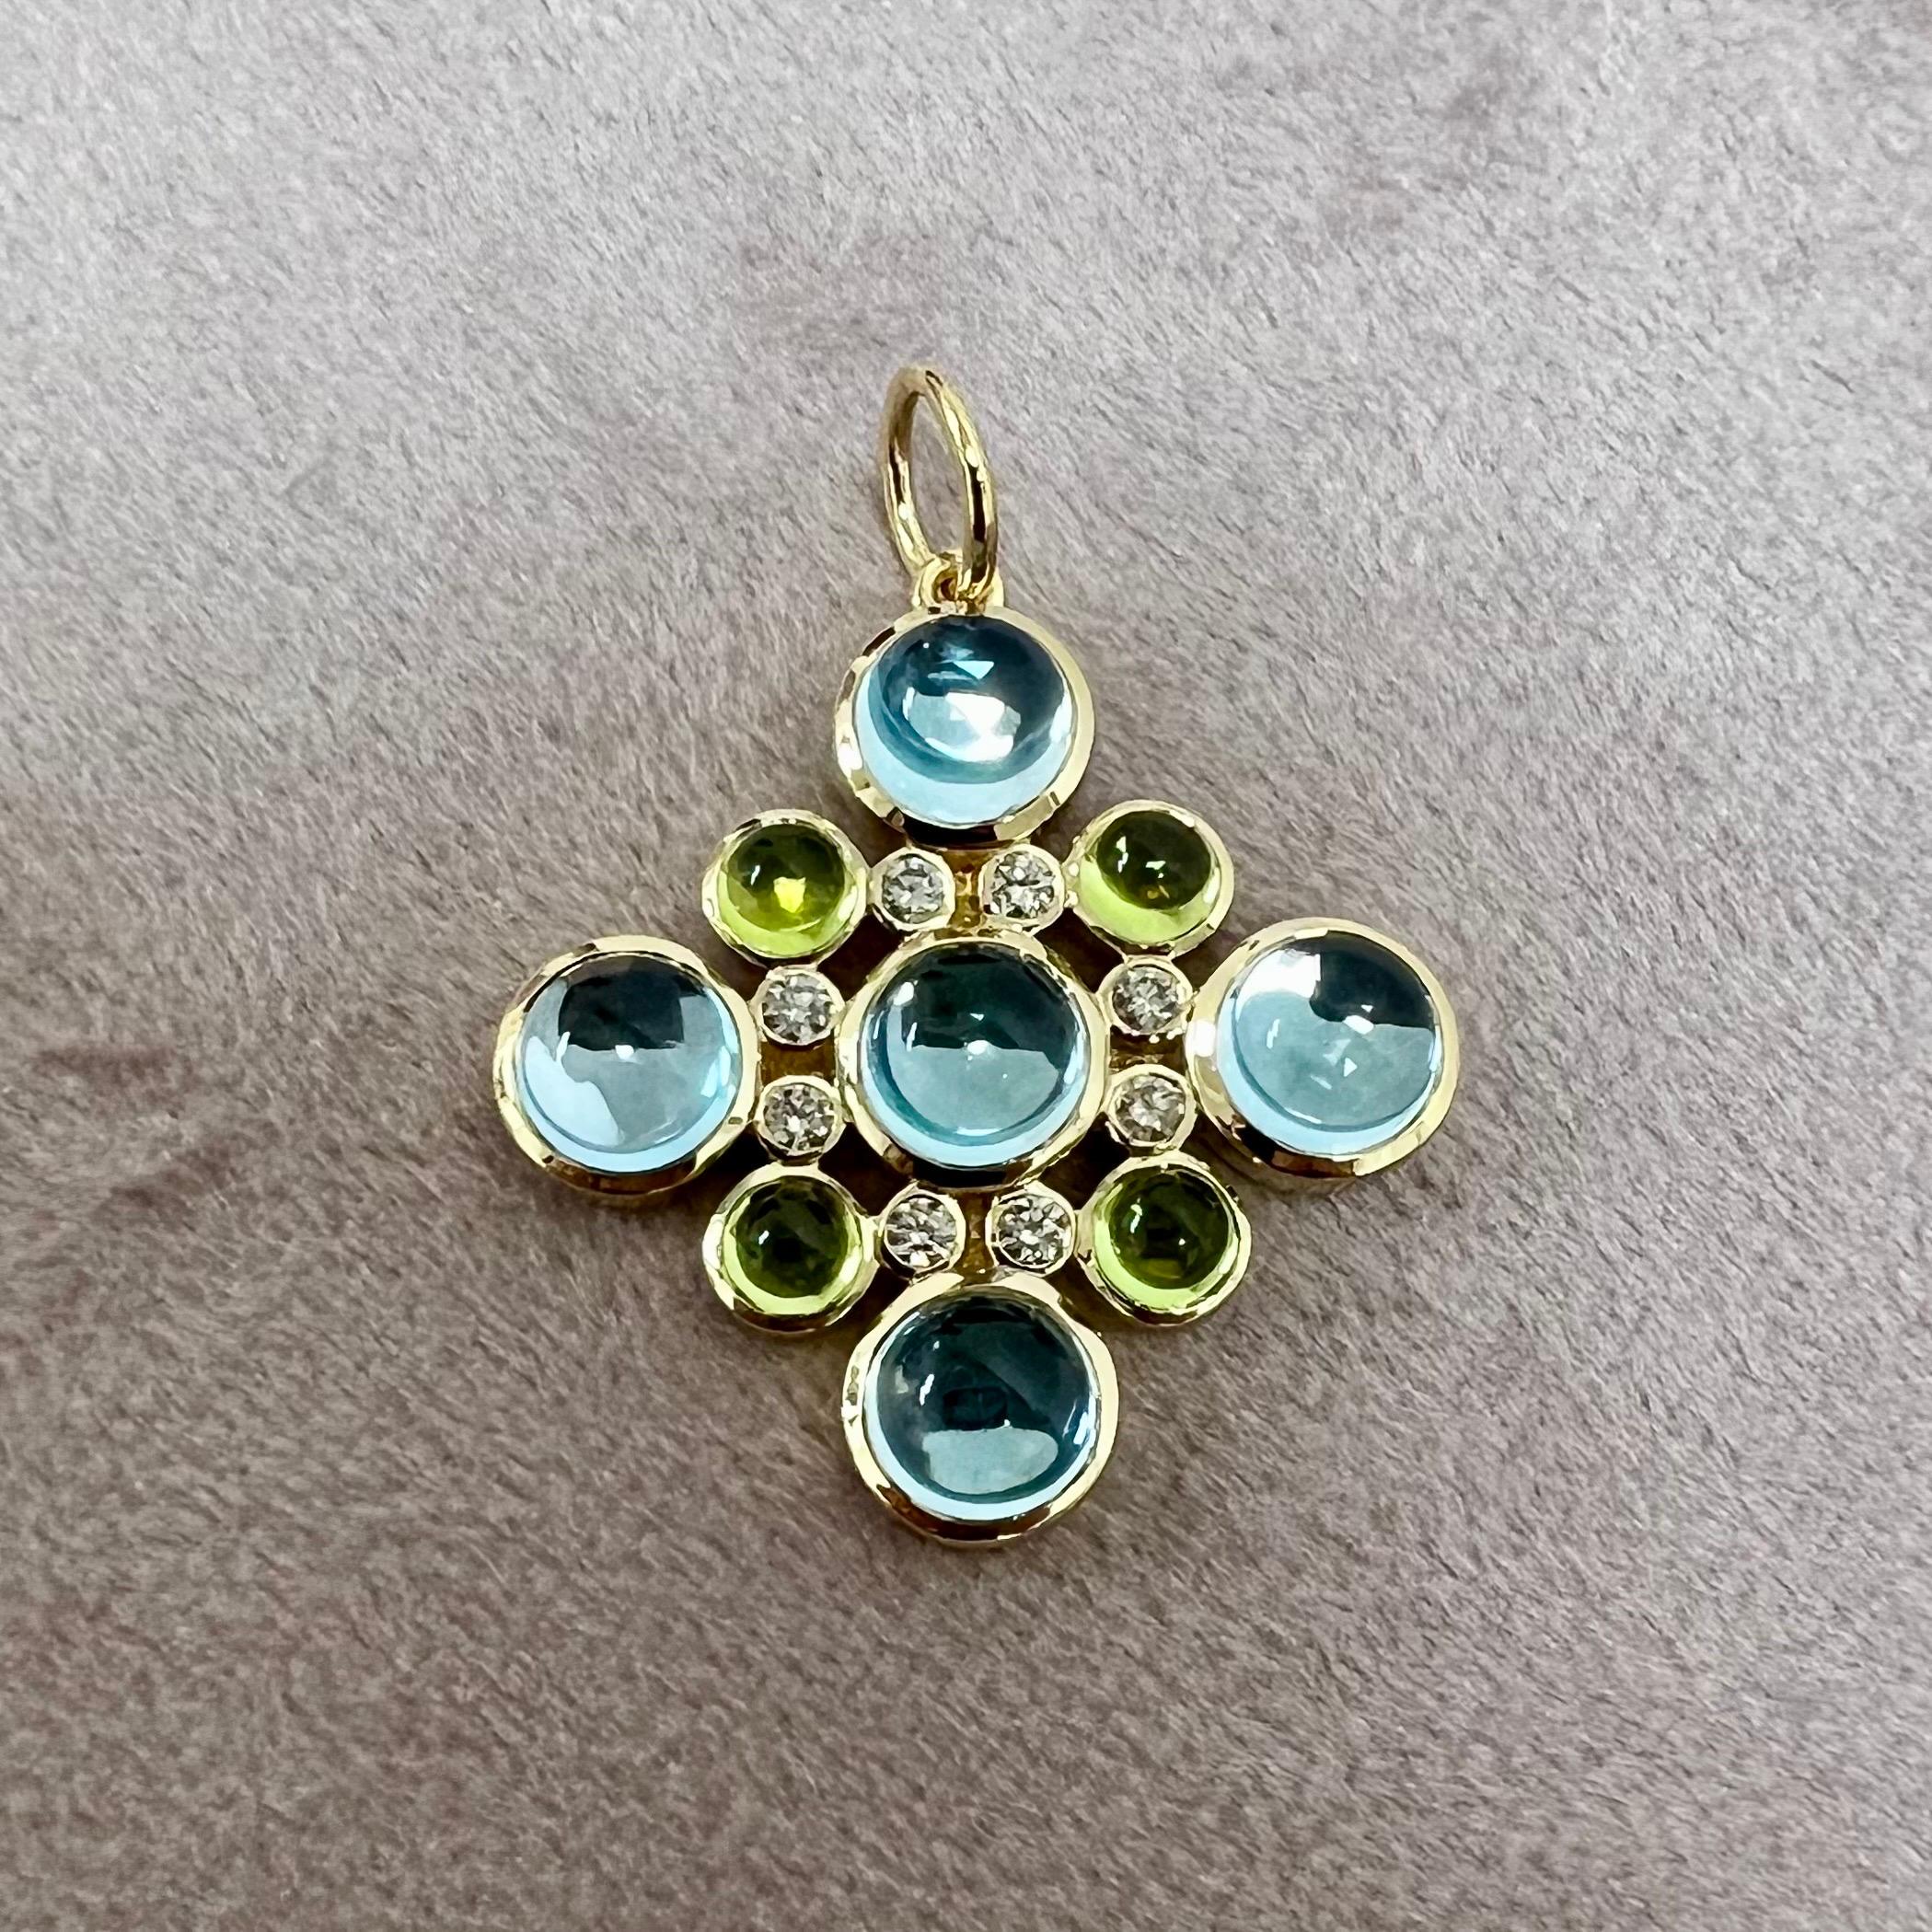 Created in 18 karat yellow gold
Peridot 1.50 carats approx.
Blue topaz 7.50 carats approx.
Diamonds 0.25 carat approx.
Chain sold separately

Enrobing 18 karat yellow gold, a Peridot of 1.50 carats, a Blue Topaz of 7.50 carats, and Diamonds of 0.25